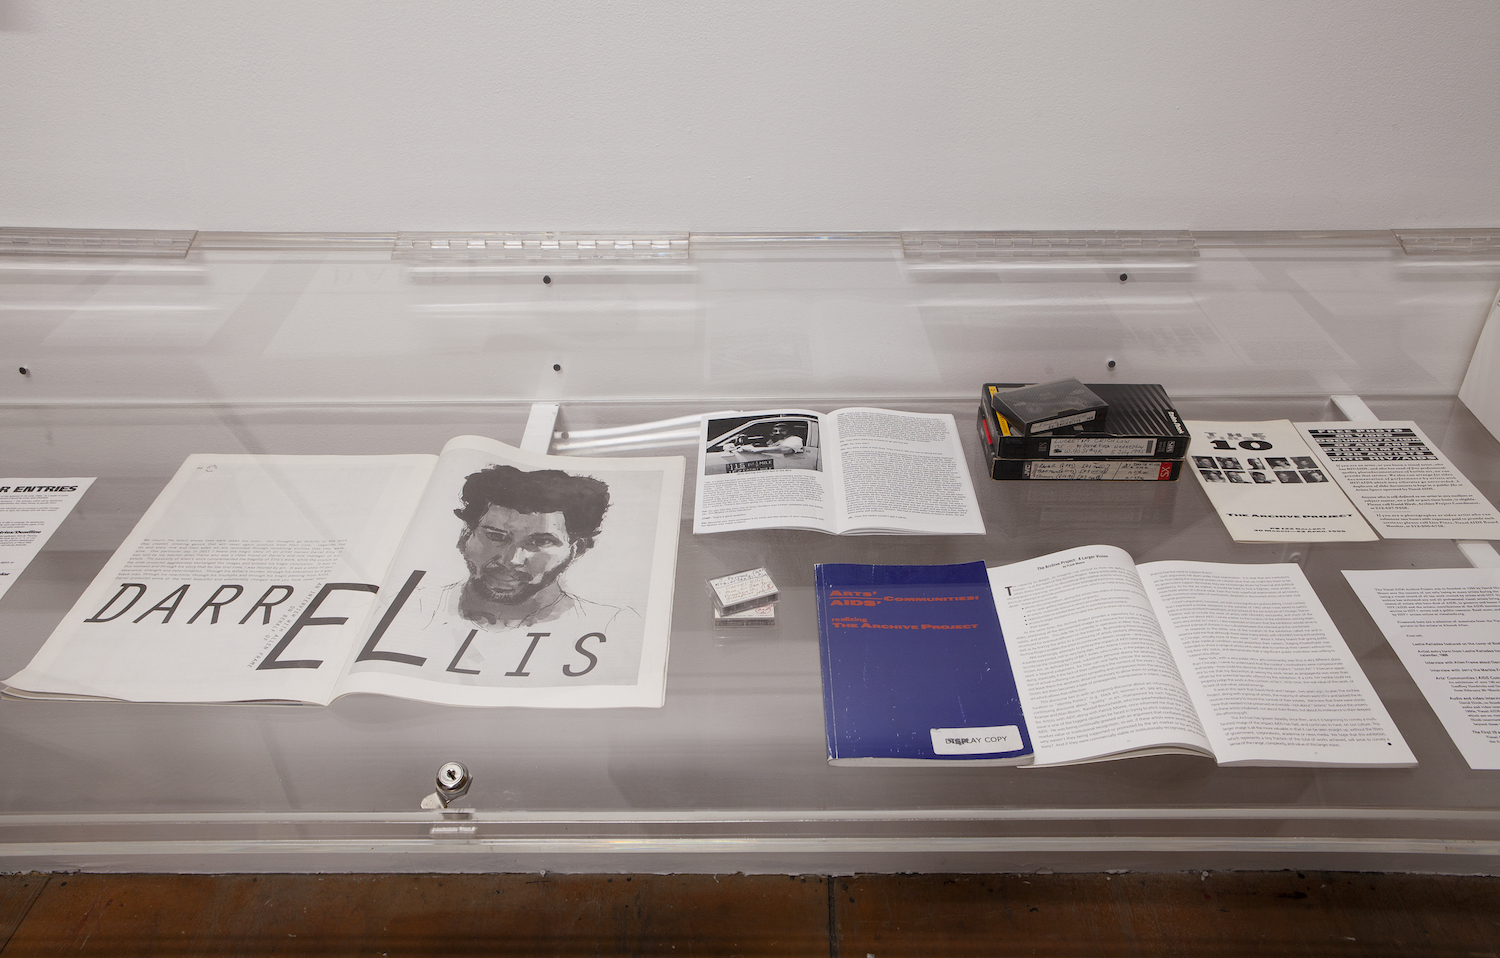 *Altered After*, installation view with Visual AIDS archival material